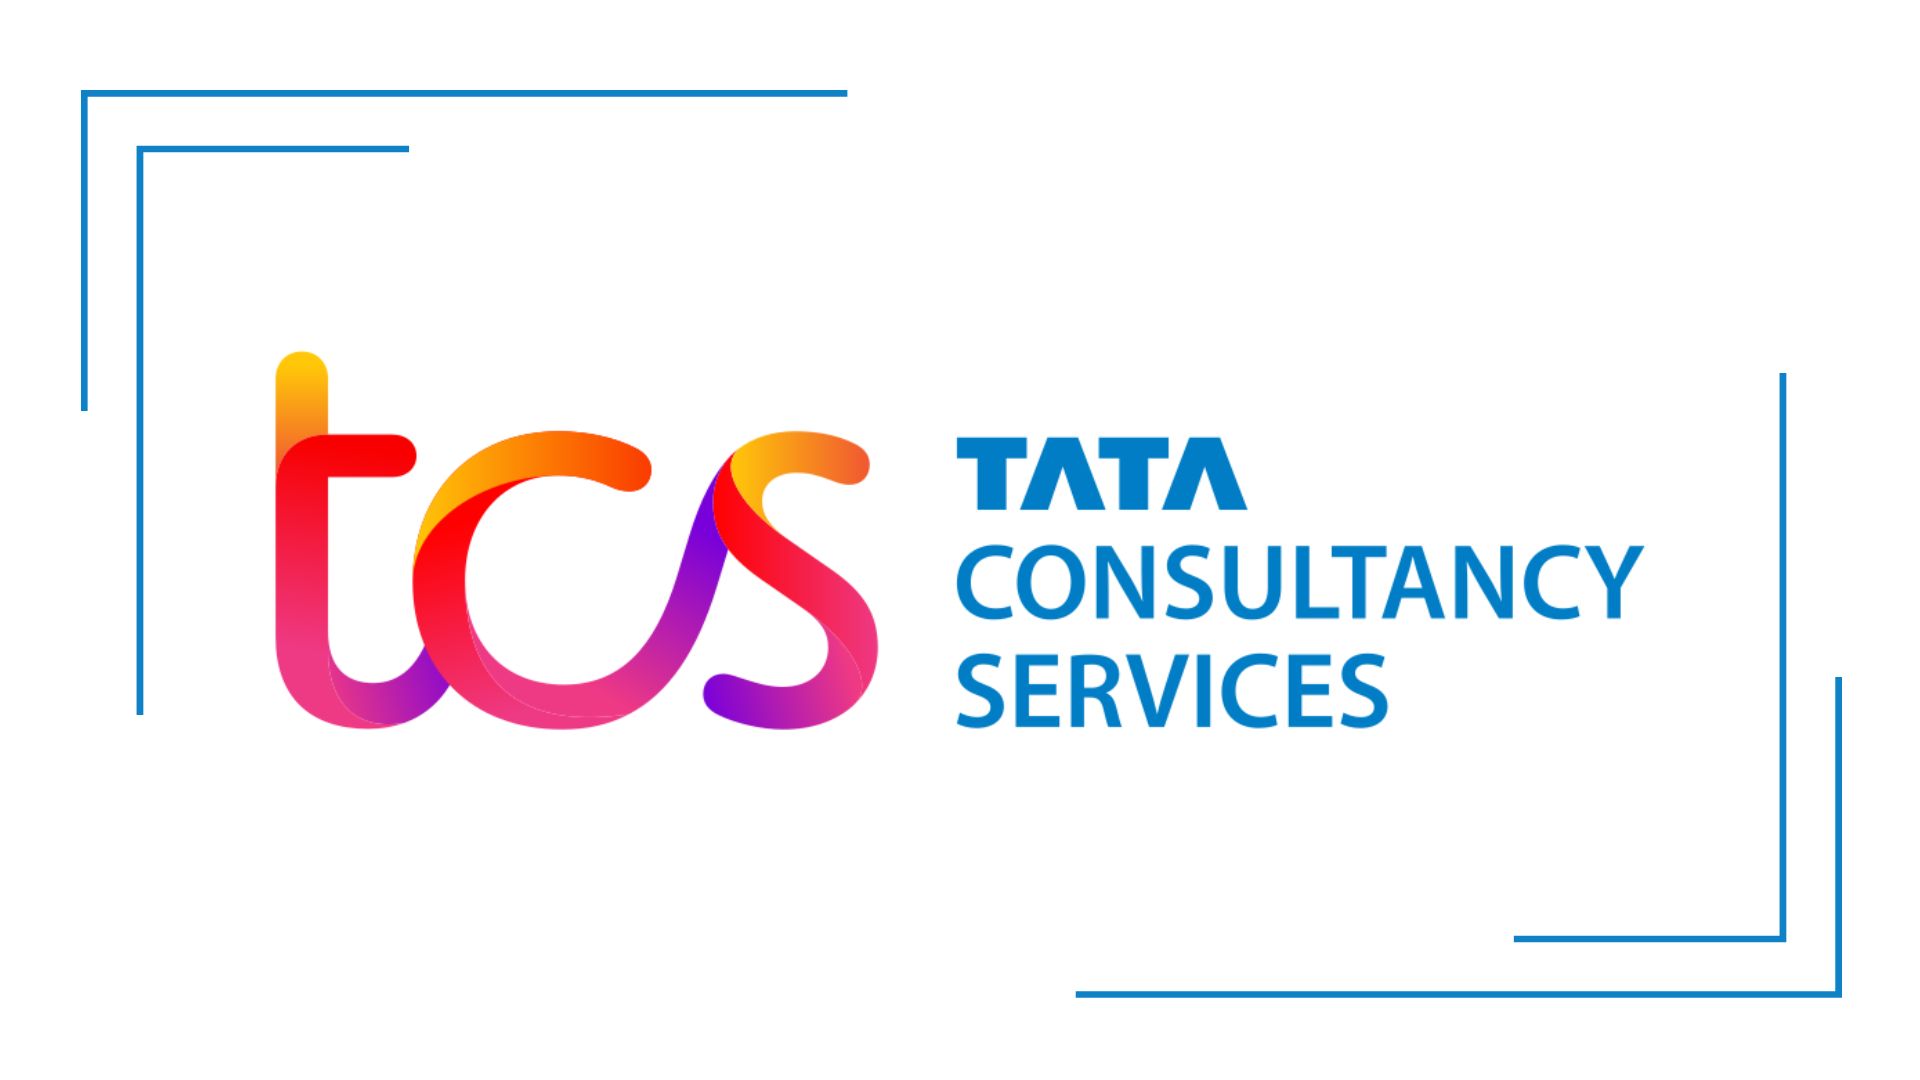 Tata Consultancy Services - List of Companies Owned by Tata Group